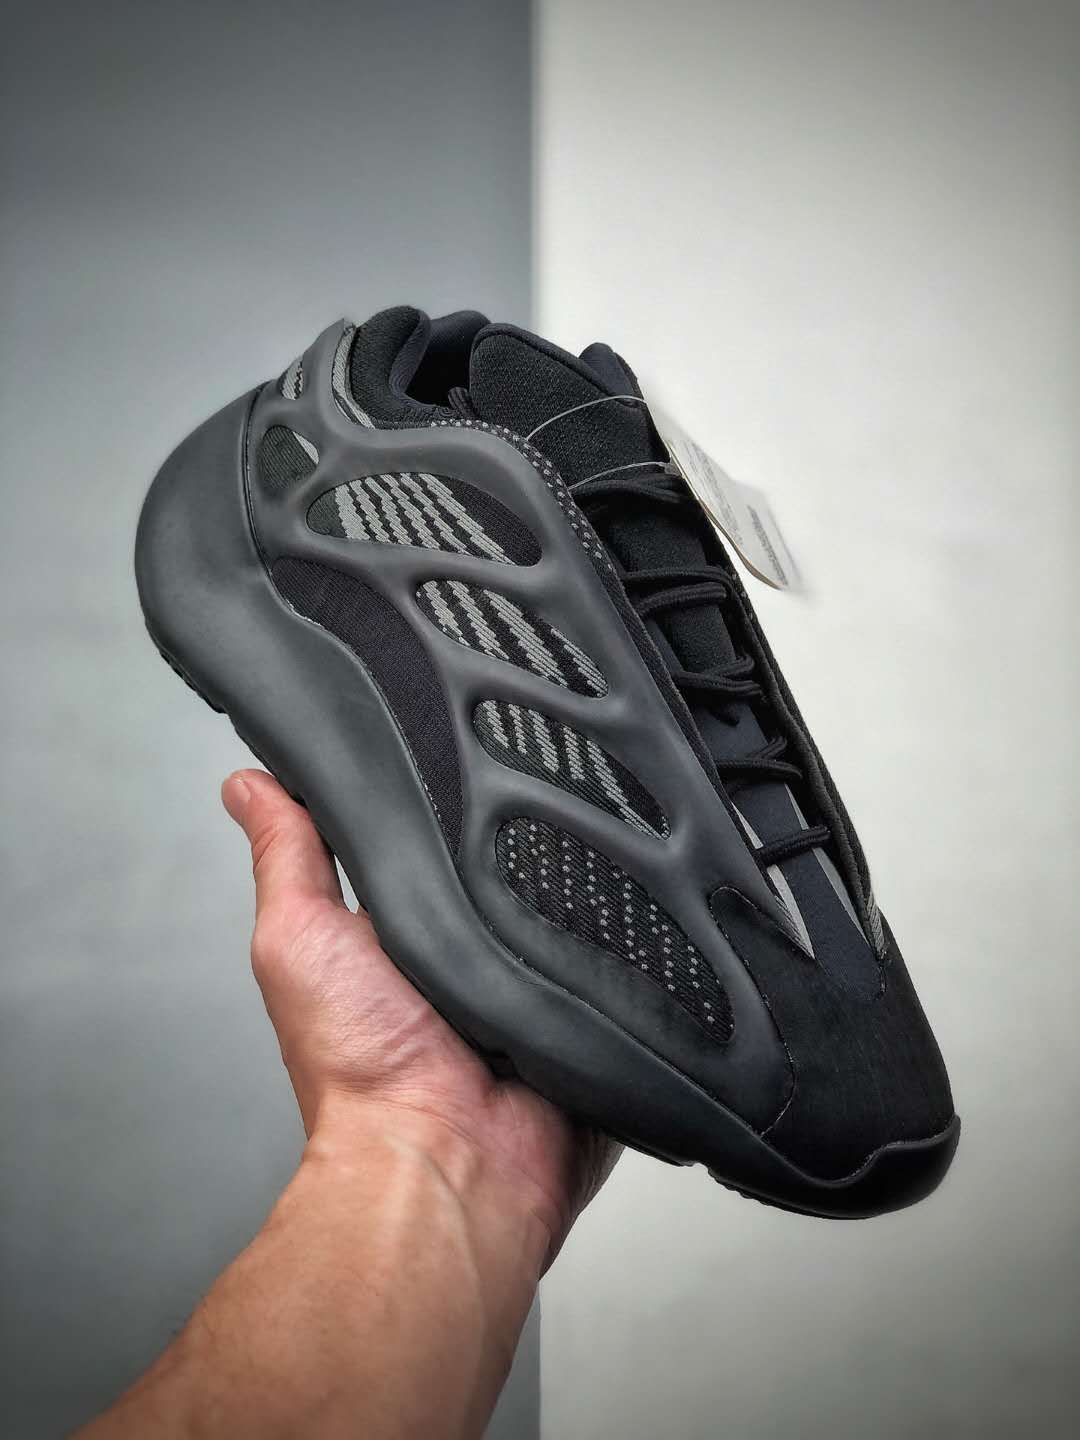 Adidas Yeezy 700 V3 Alvah - Shop the Sleek and Stylish Sneaker Now!